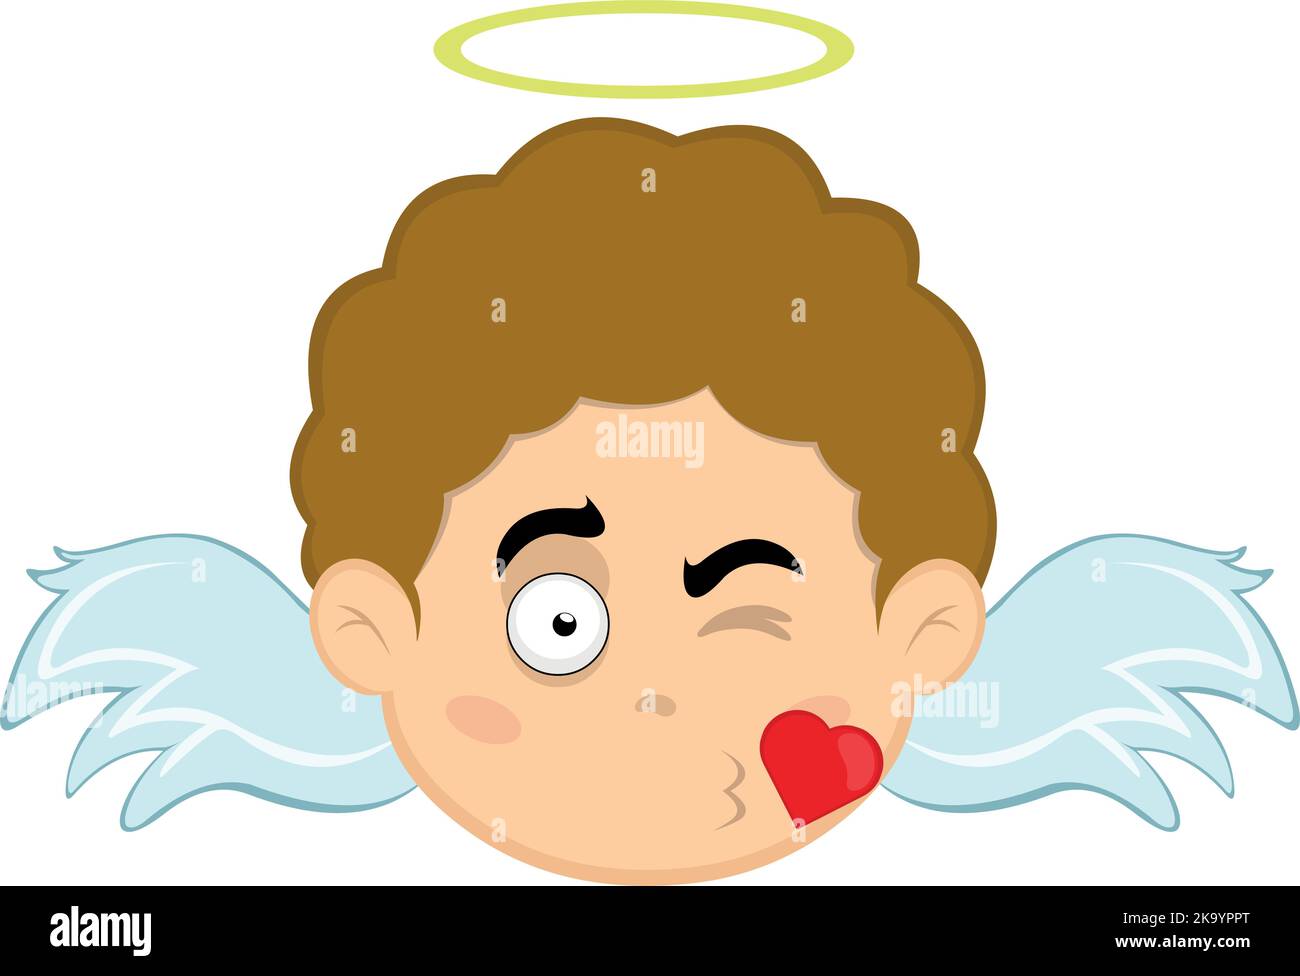 Angel shaped wings Stock Vector Images - Alamy